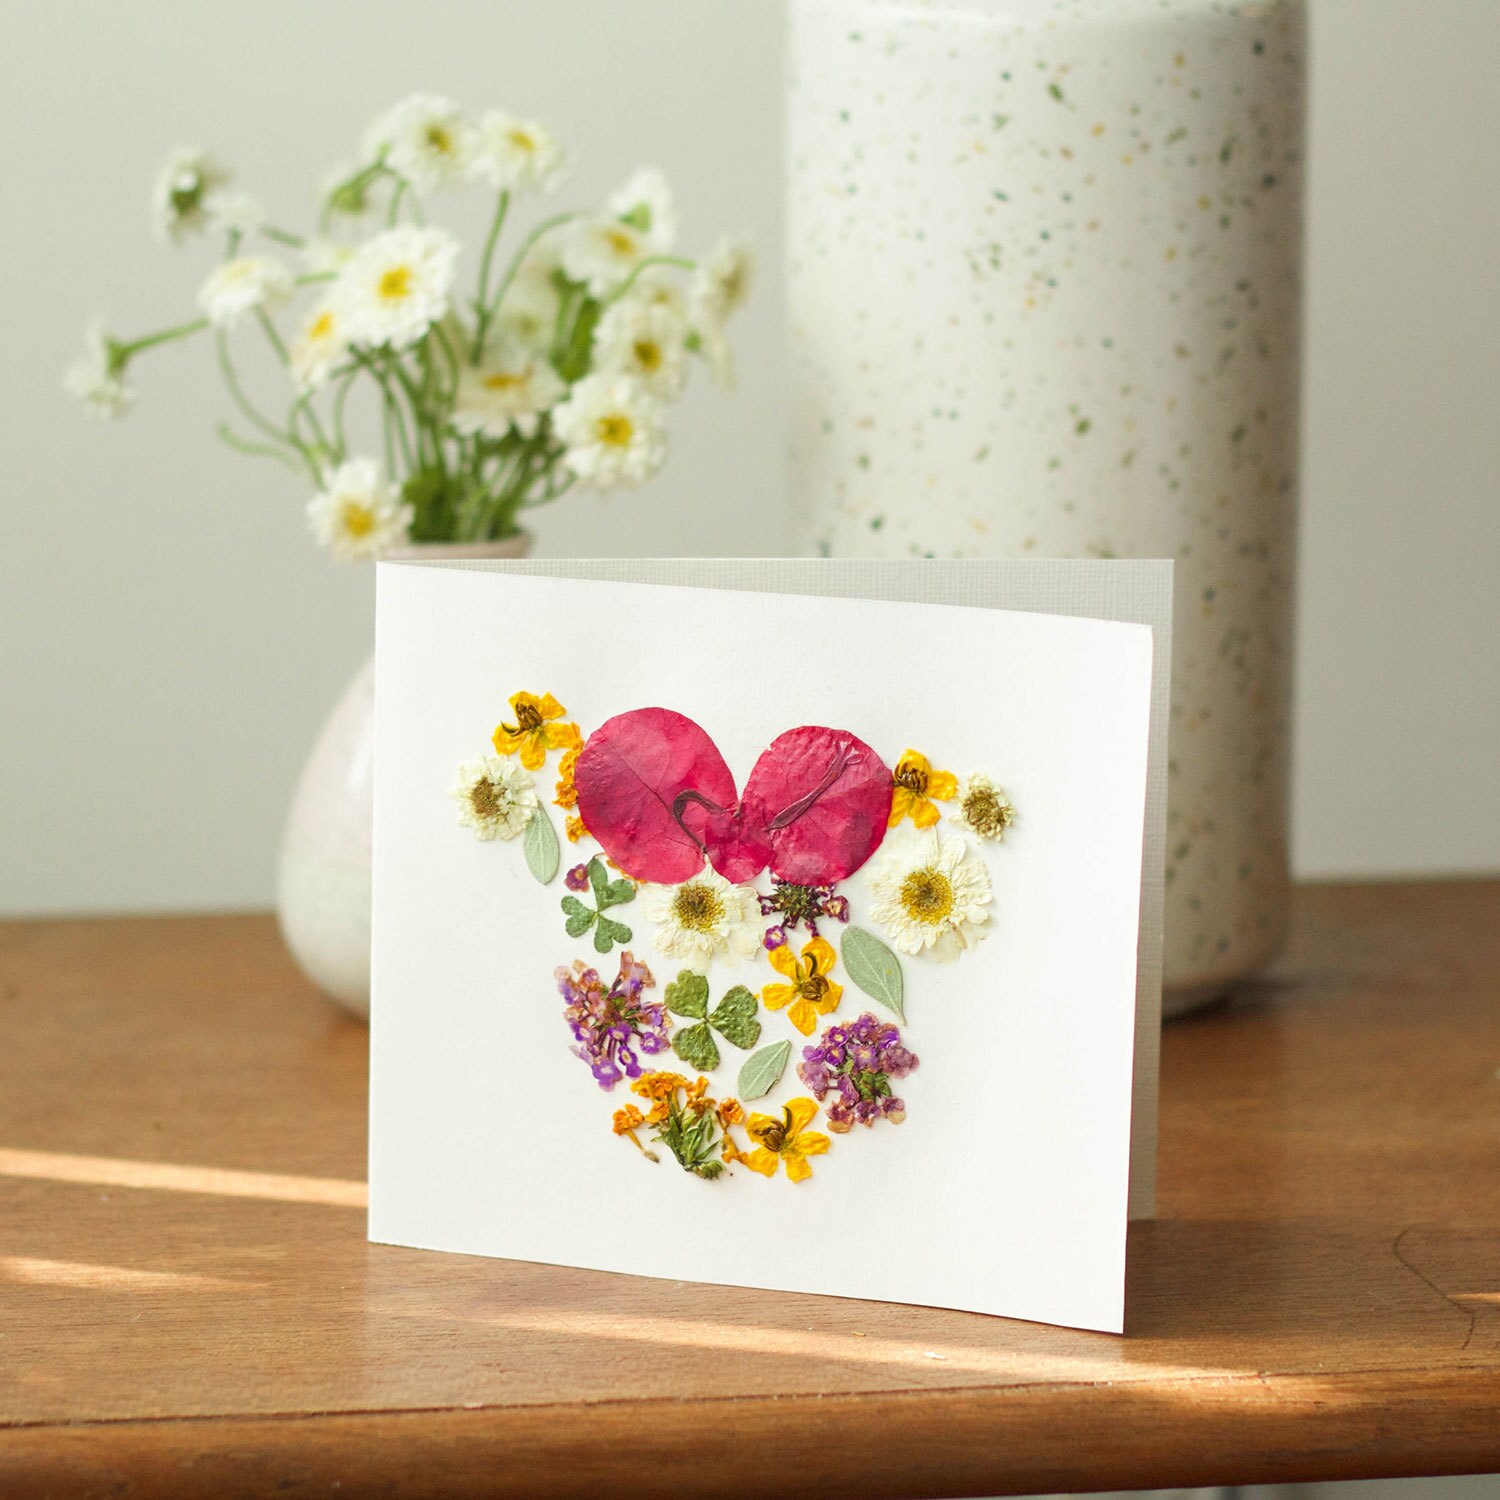 A homemade card featuring pressed flowers in the shape of Minnie Mouse.